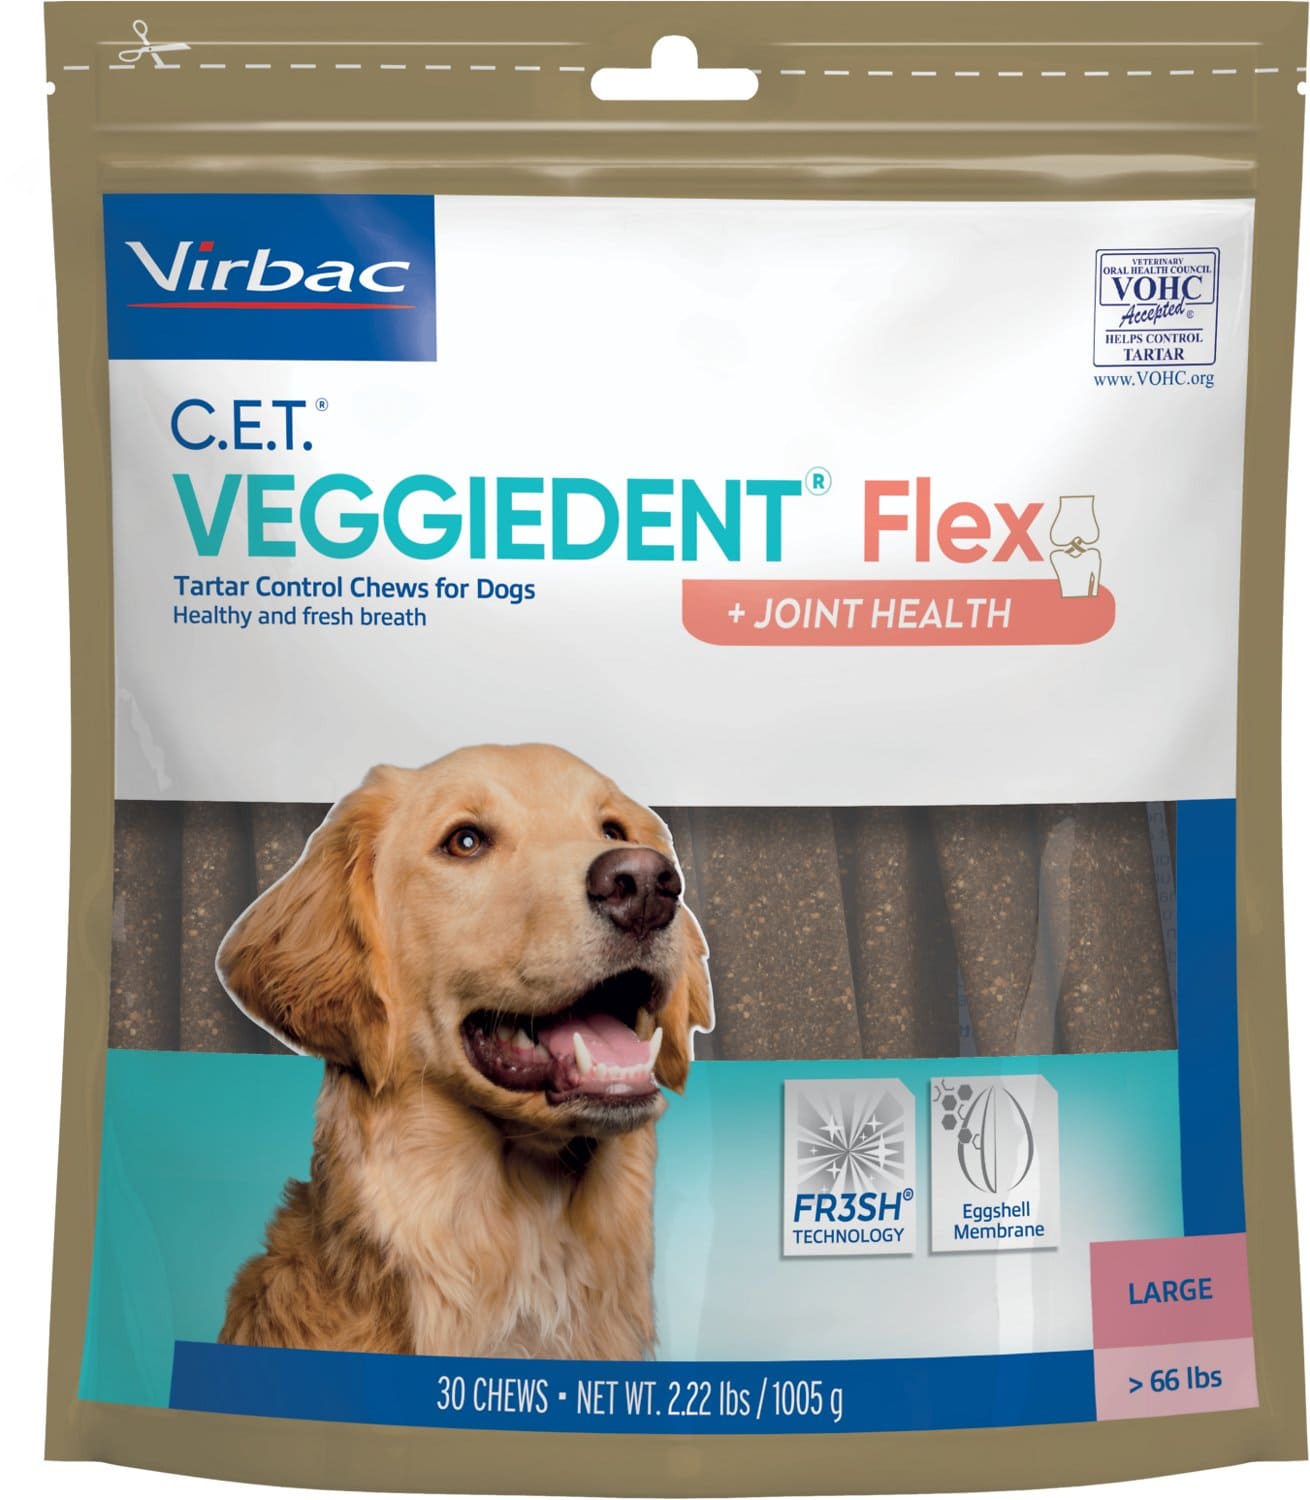 C.E.T. VeggieDent Flex + Salud Articular for large dogs over 66 lbs 30 chews 1